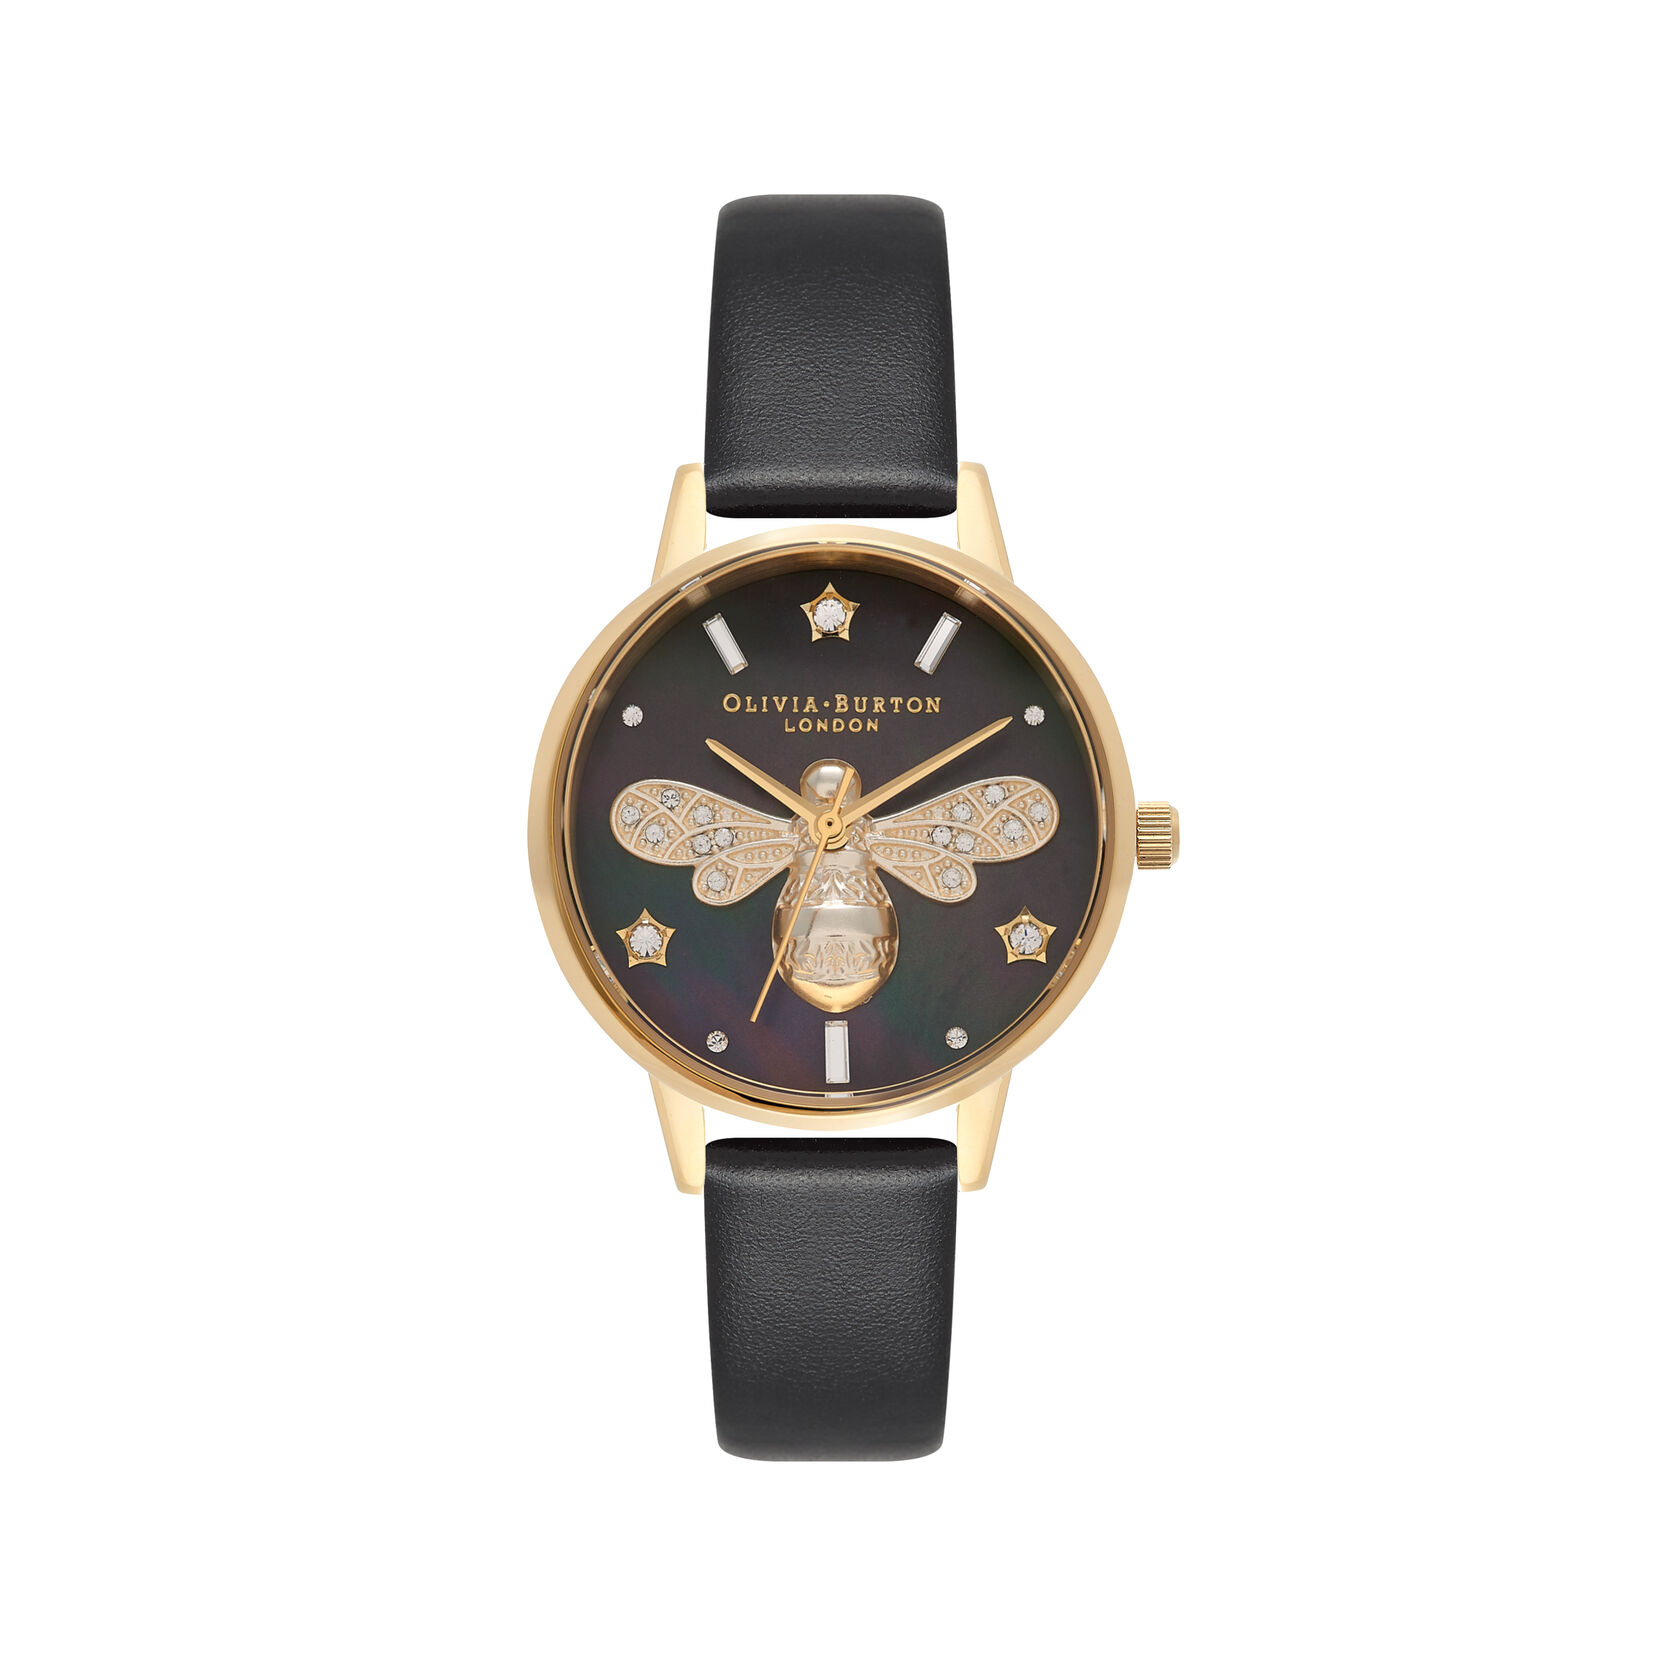 30mm Gold & Black Leather Strap Watch